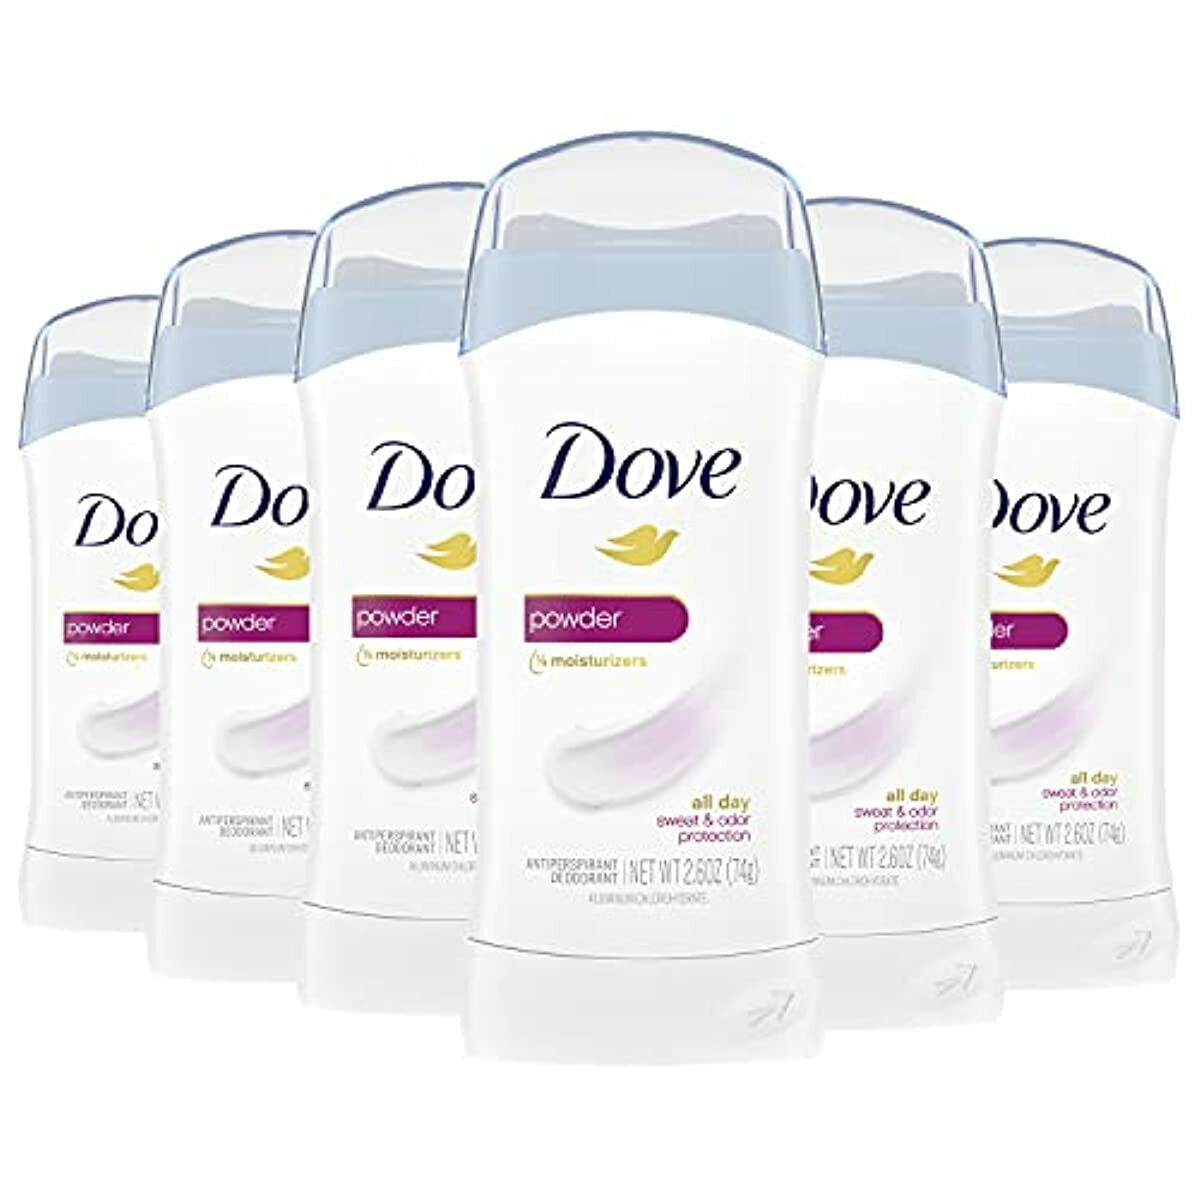 Dove Invisible Solid Antiperspirant Deodorant Stick for Women, Powder, For All Day Underarm Sweat & Odor Protection, 2.6 Ounce (Pack of 6)